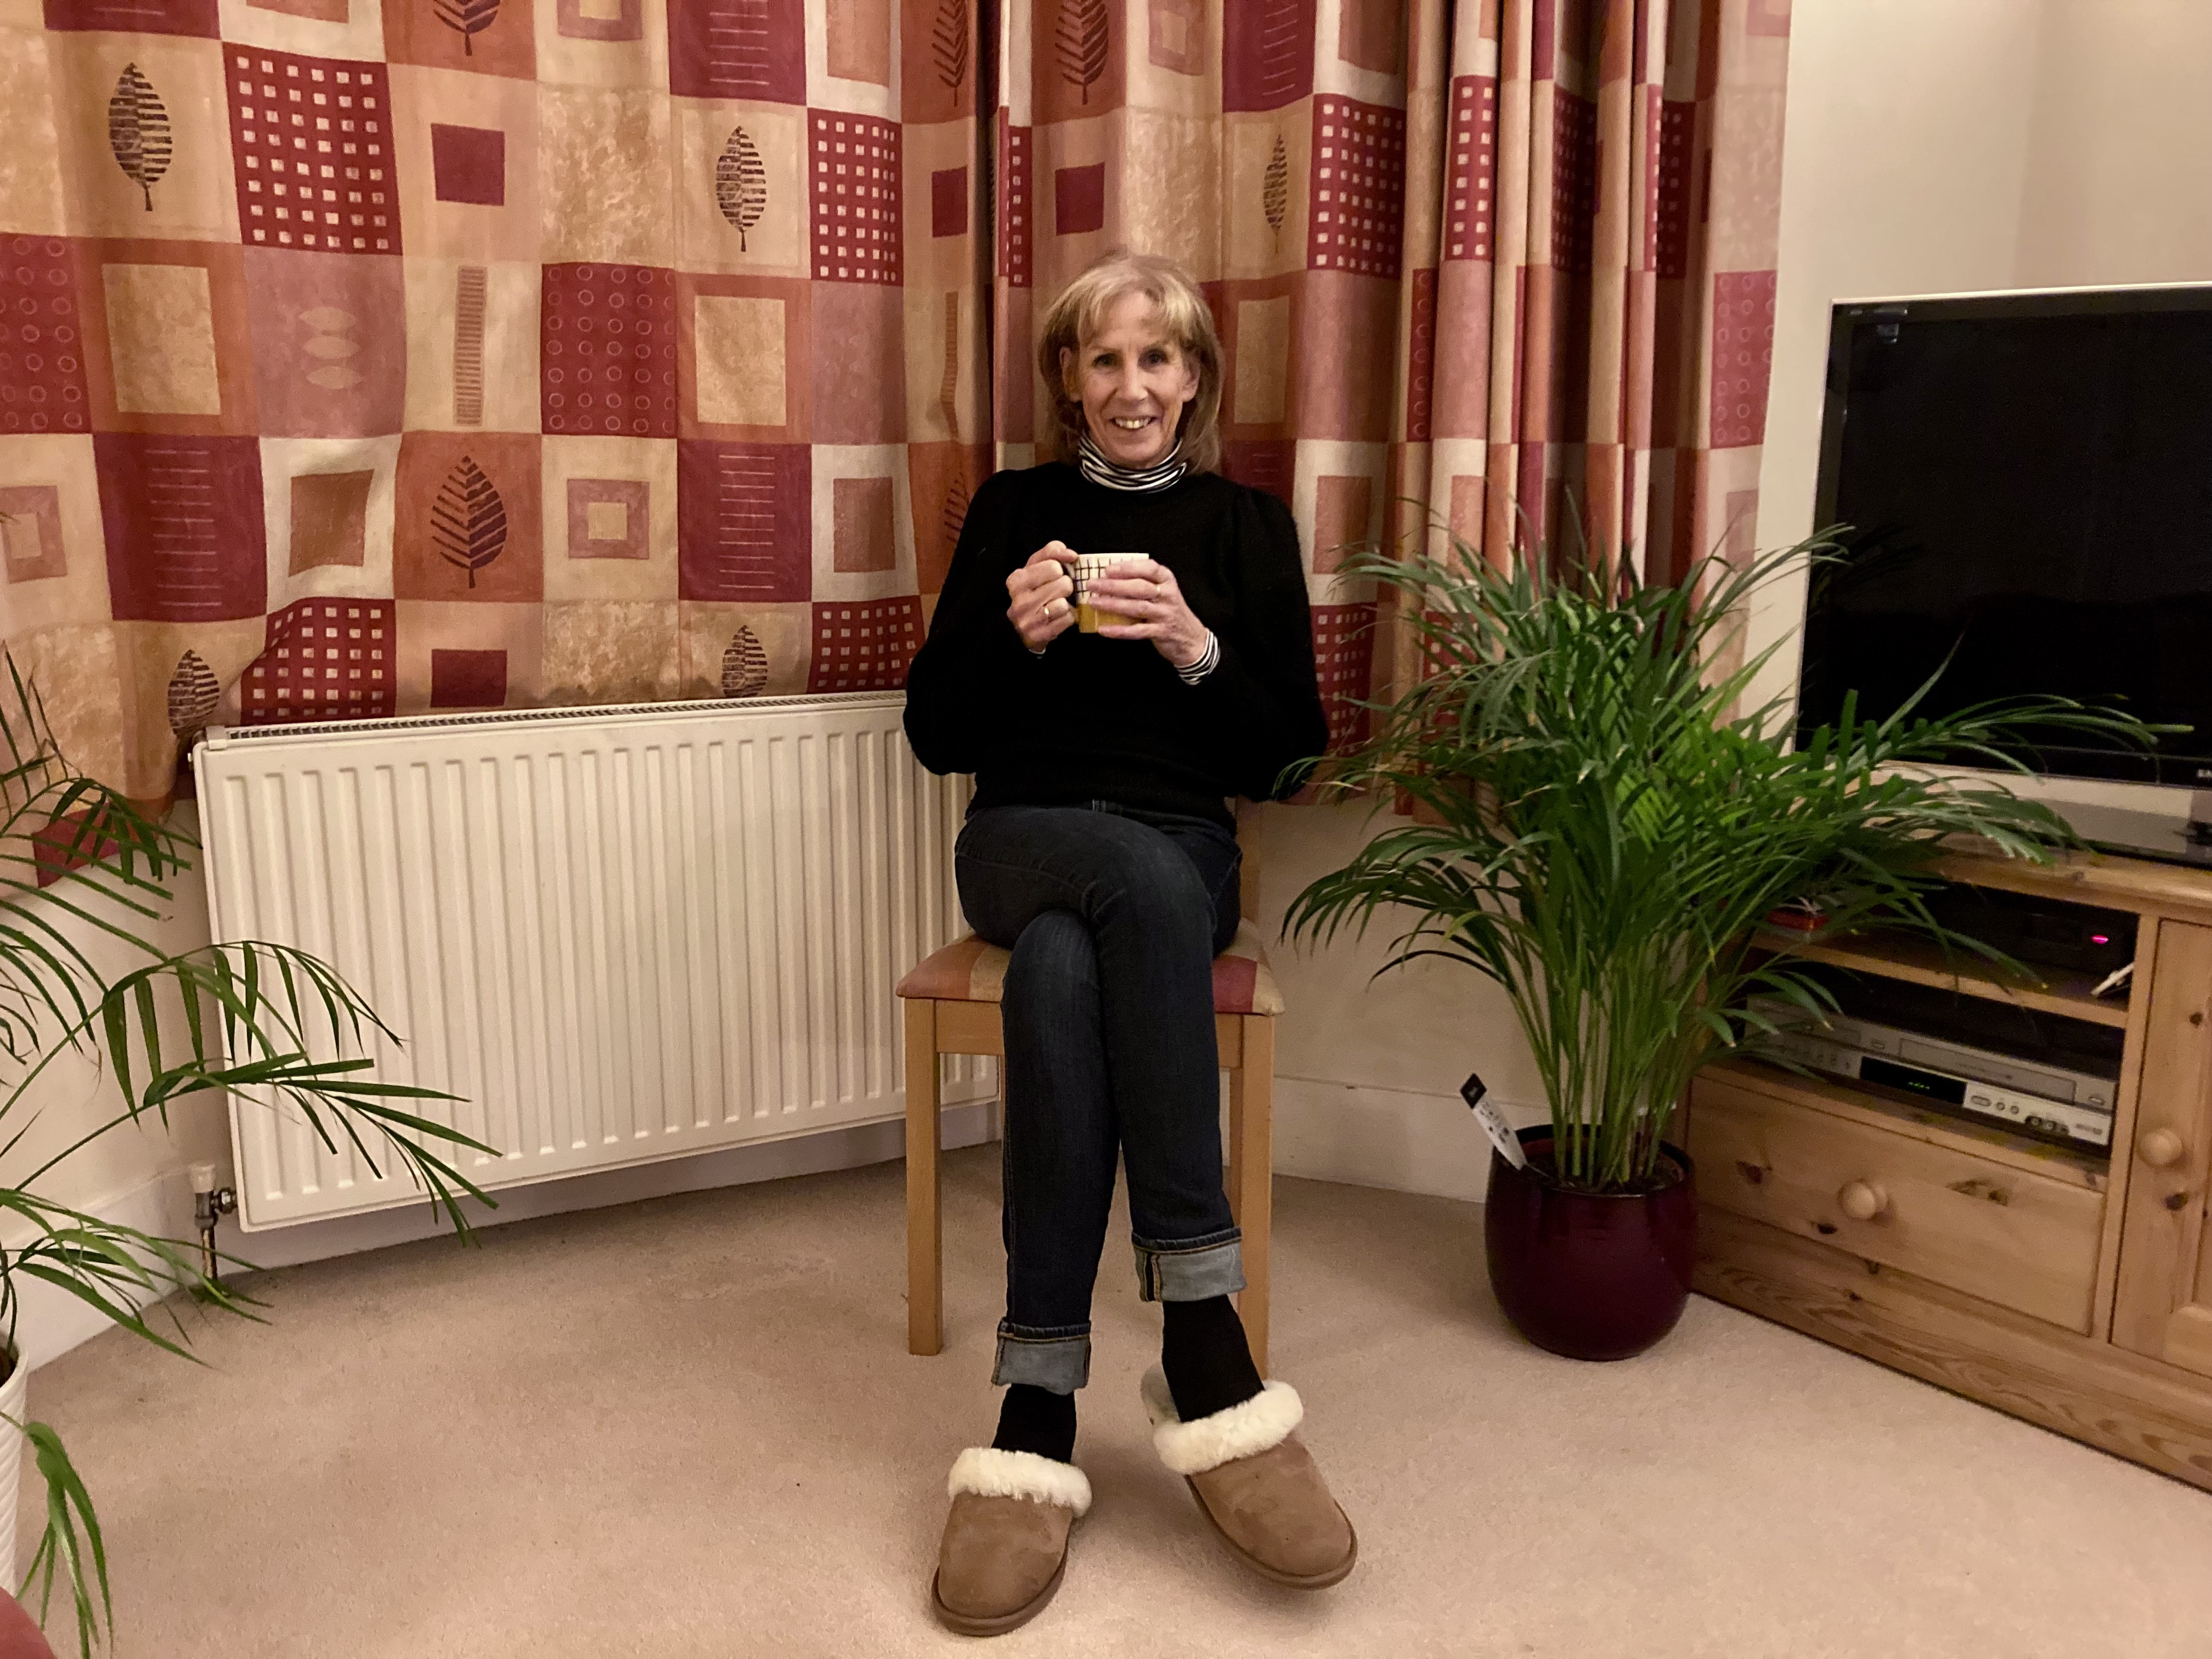 “I’m fortunate enough to not need my energy rebate, so I decided to donate it to Ruils.  It was quick and easy to do and I’m delighted to know that the money will be used to lift some of the pressure from someone who is really struggling at the moment.” - Paula, Ruils supporter